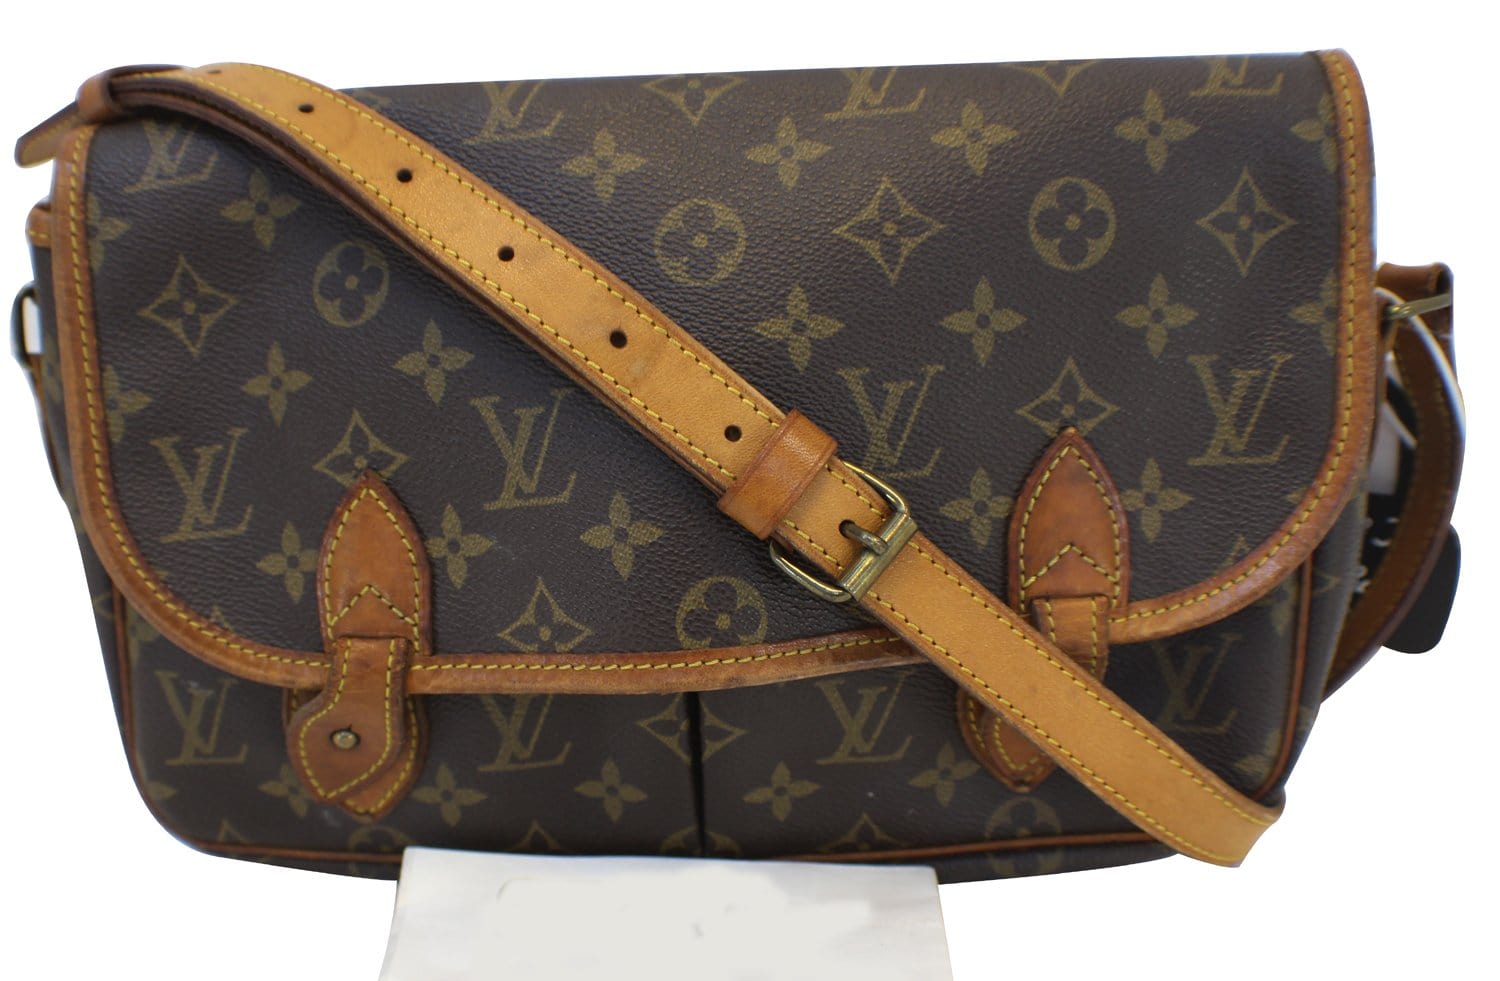 Authentic Louis Vuitton Gift Bag Approximately 14” X 10” X 4.5”